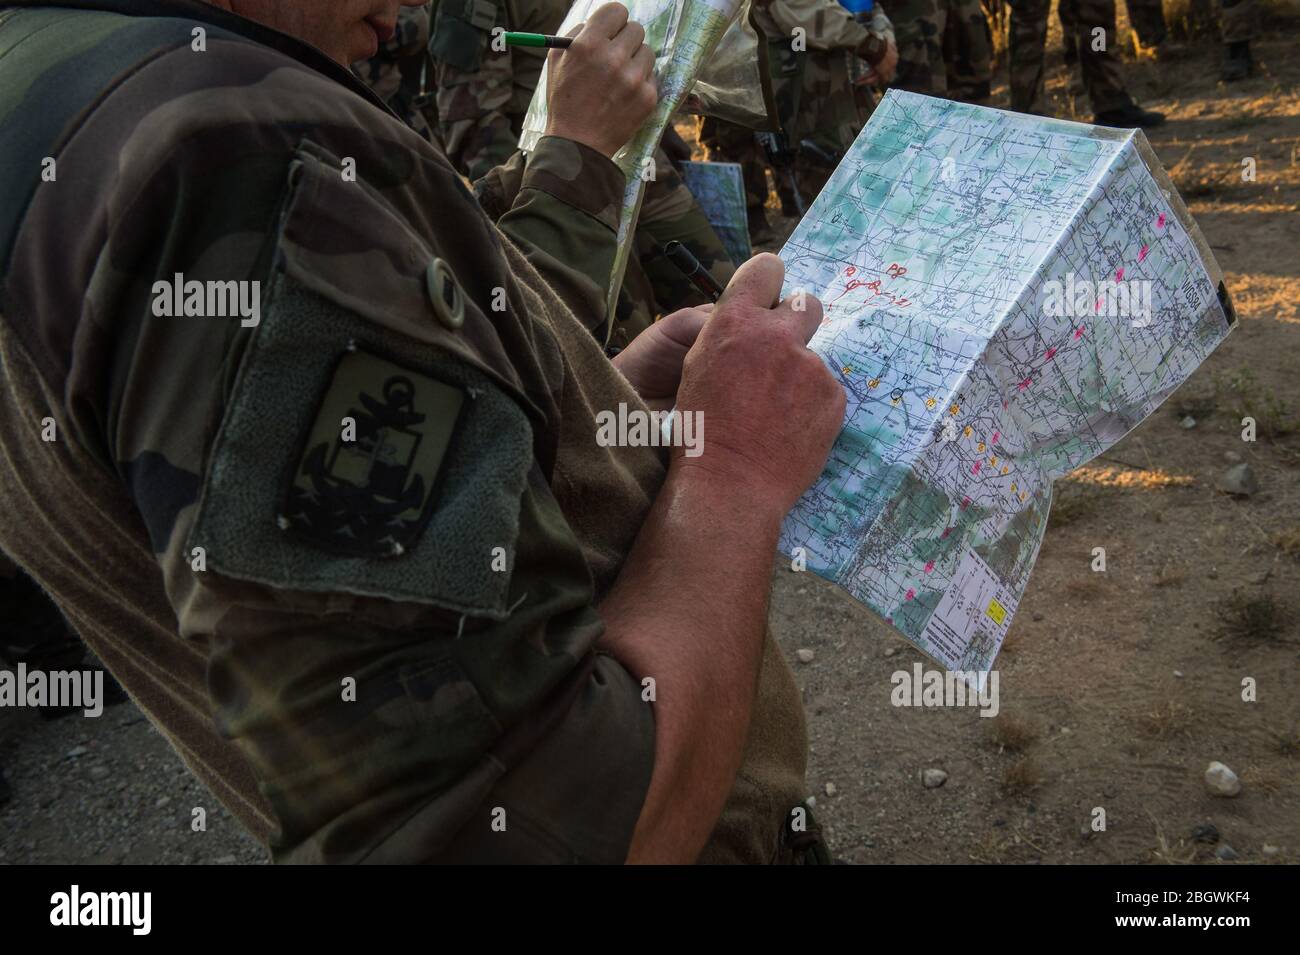 DRAGUIGNAN, FRANCE - JULY 19: two soldiers writing on maps during the preparation in the Canjuers camp of French soldiers leaving for four months of O Stock Photo